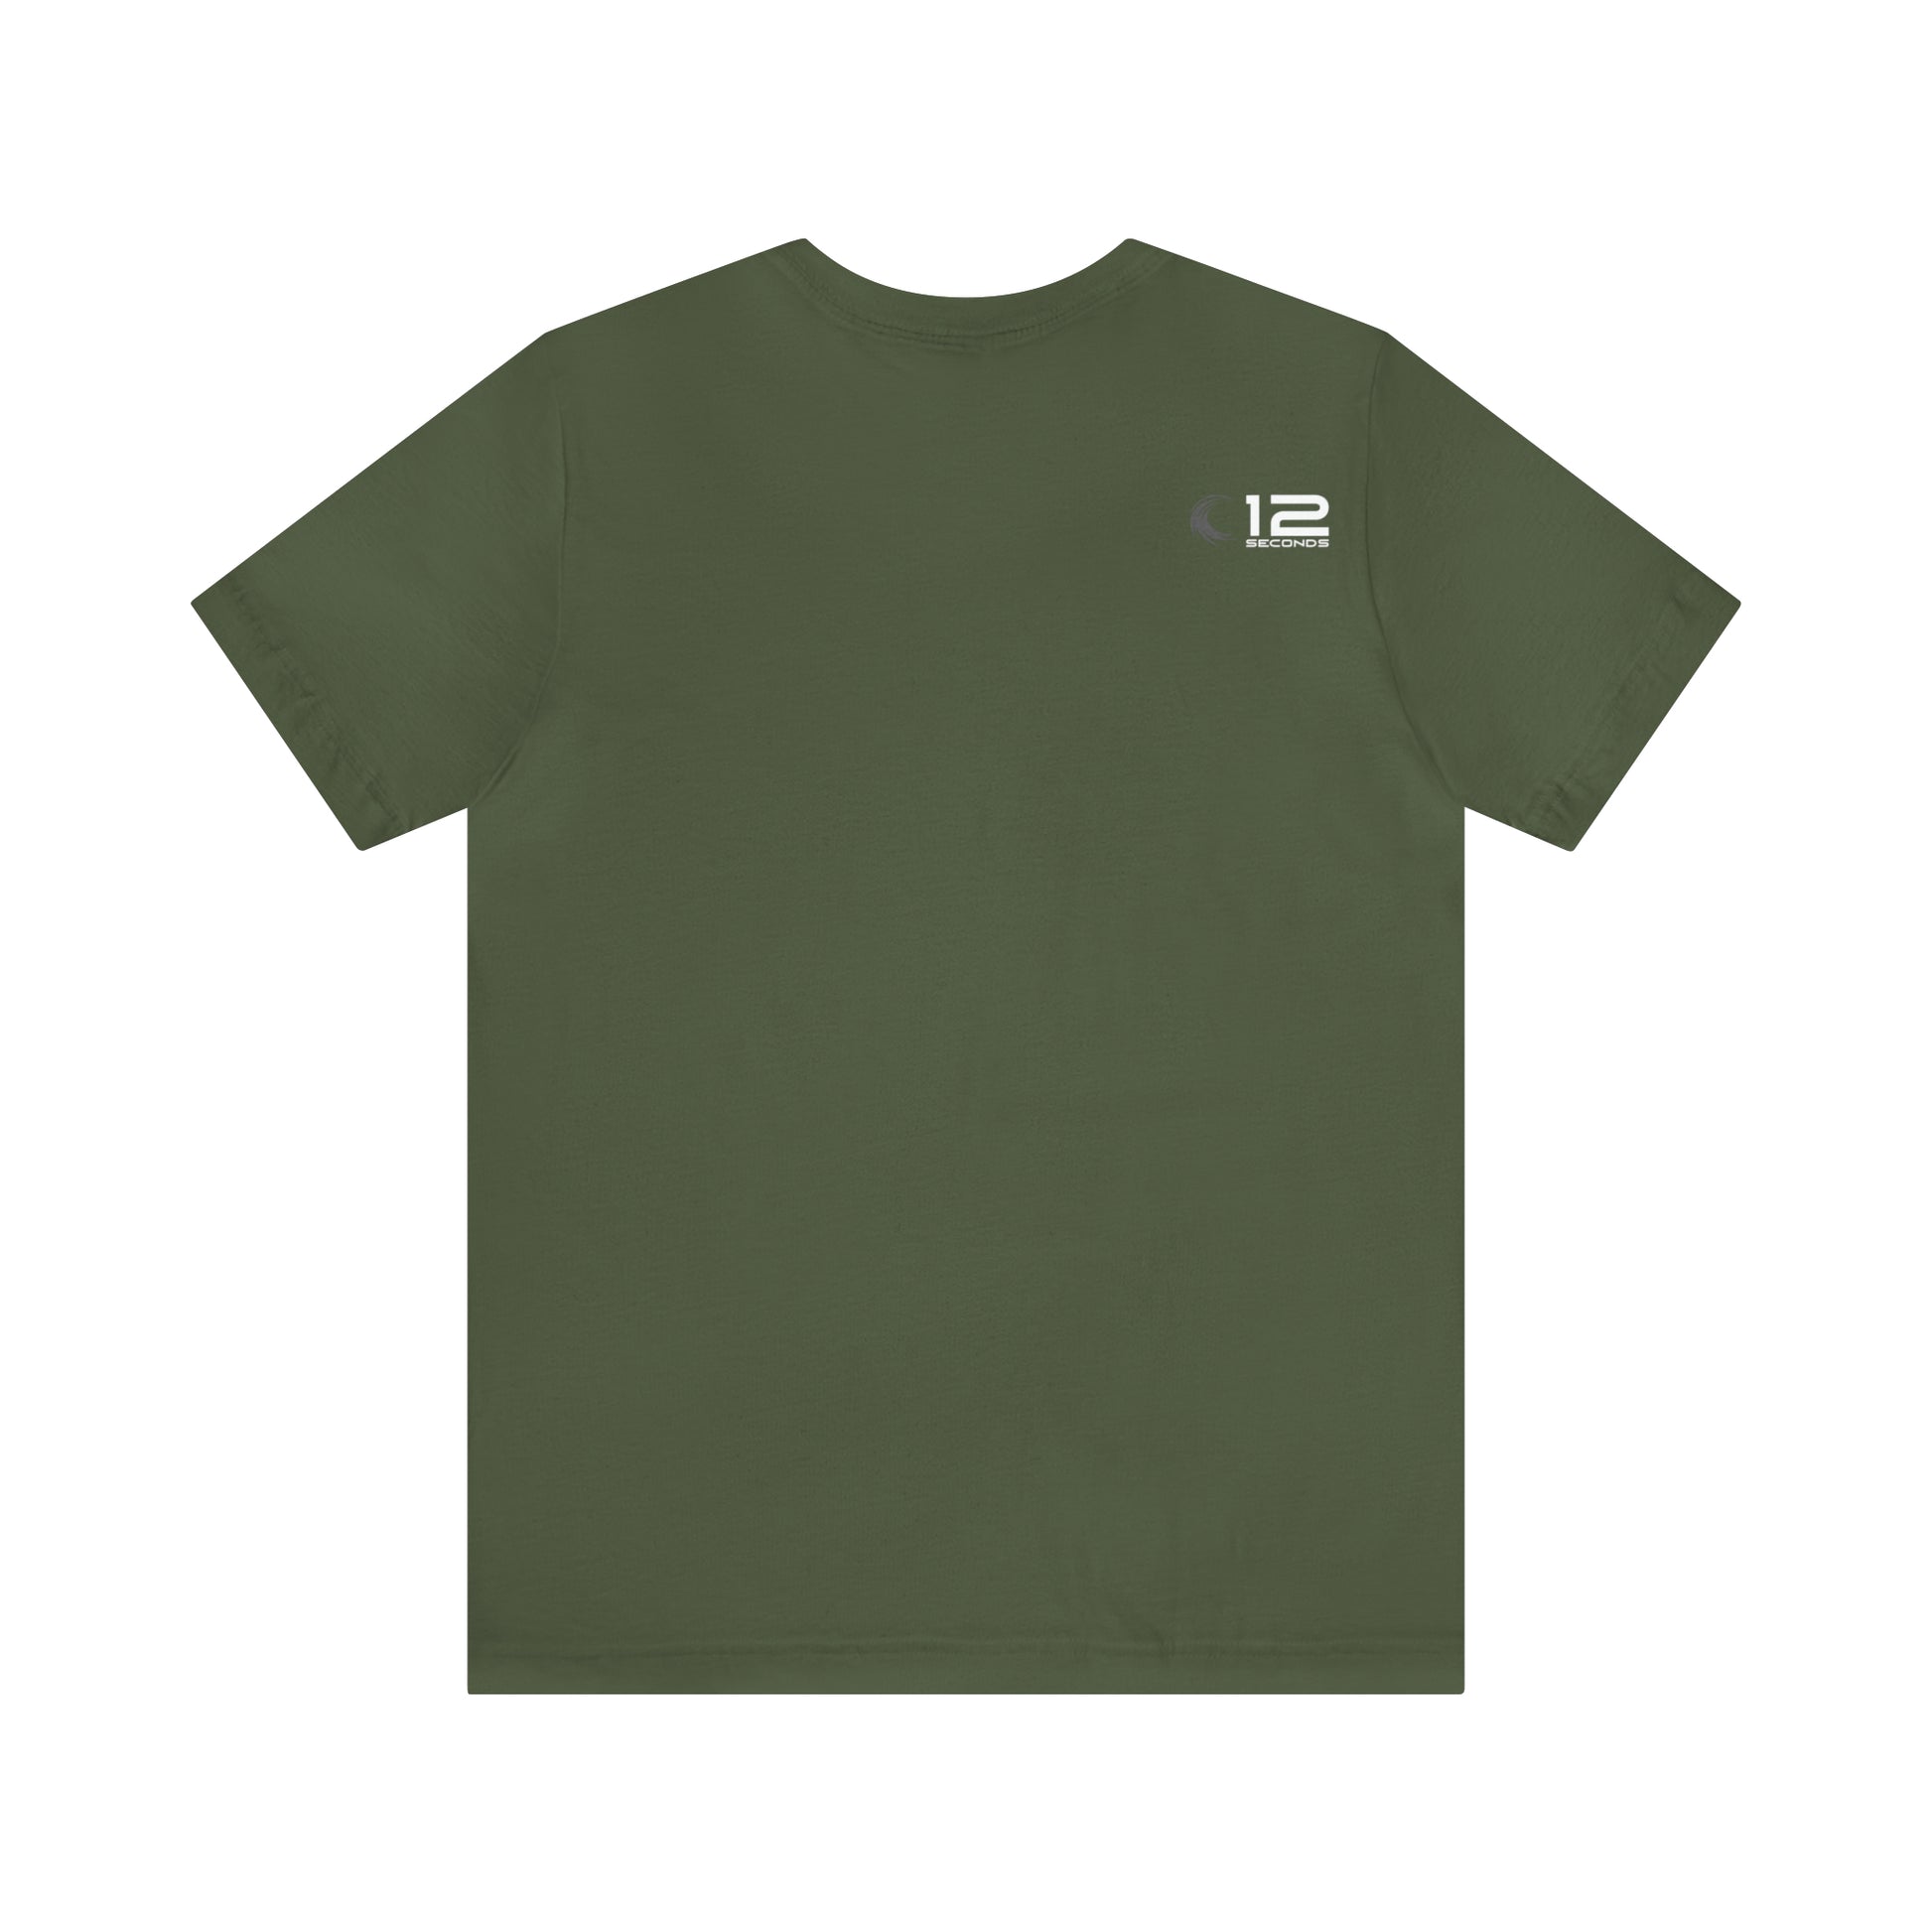 Jersey Short Sleeve Tee - LION PAW - 12 SECONDS APPAREL